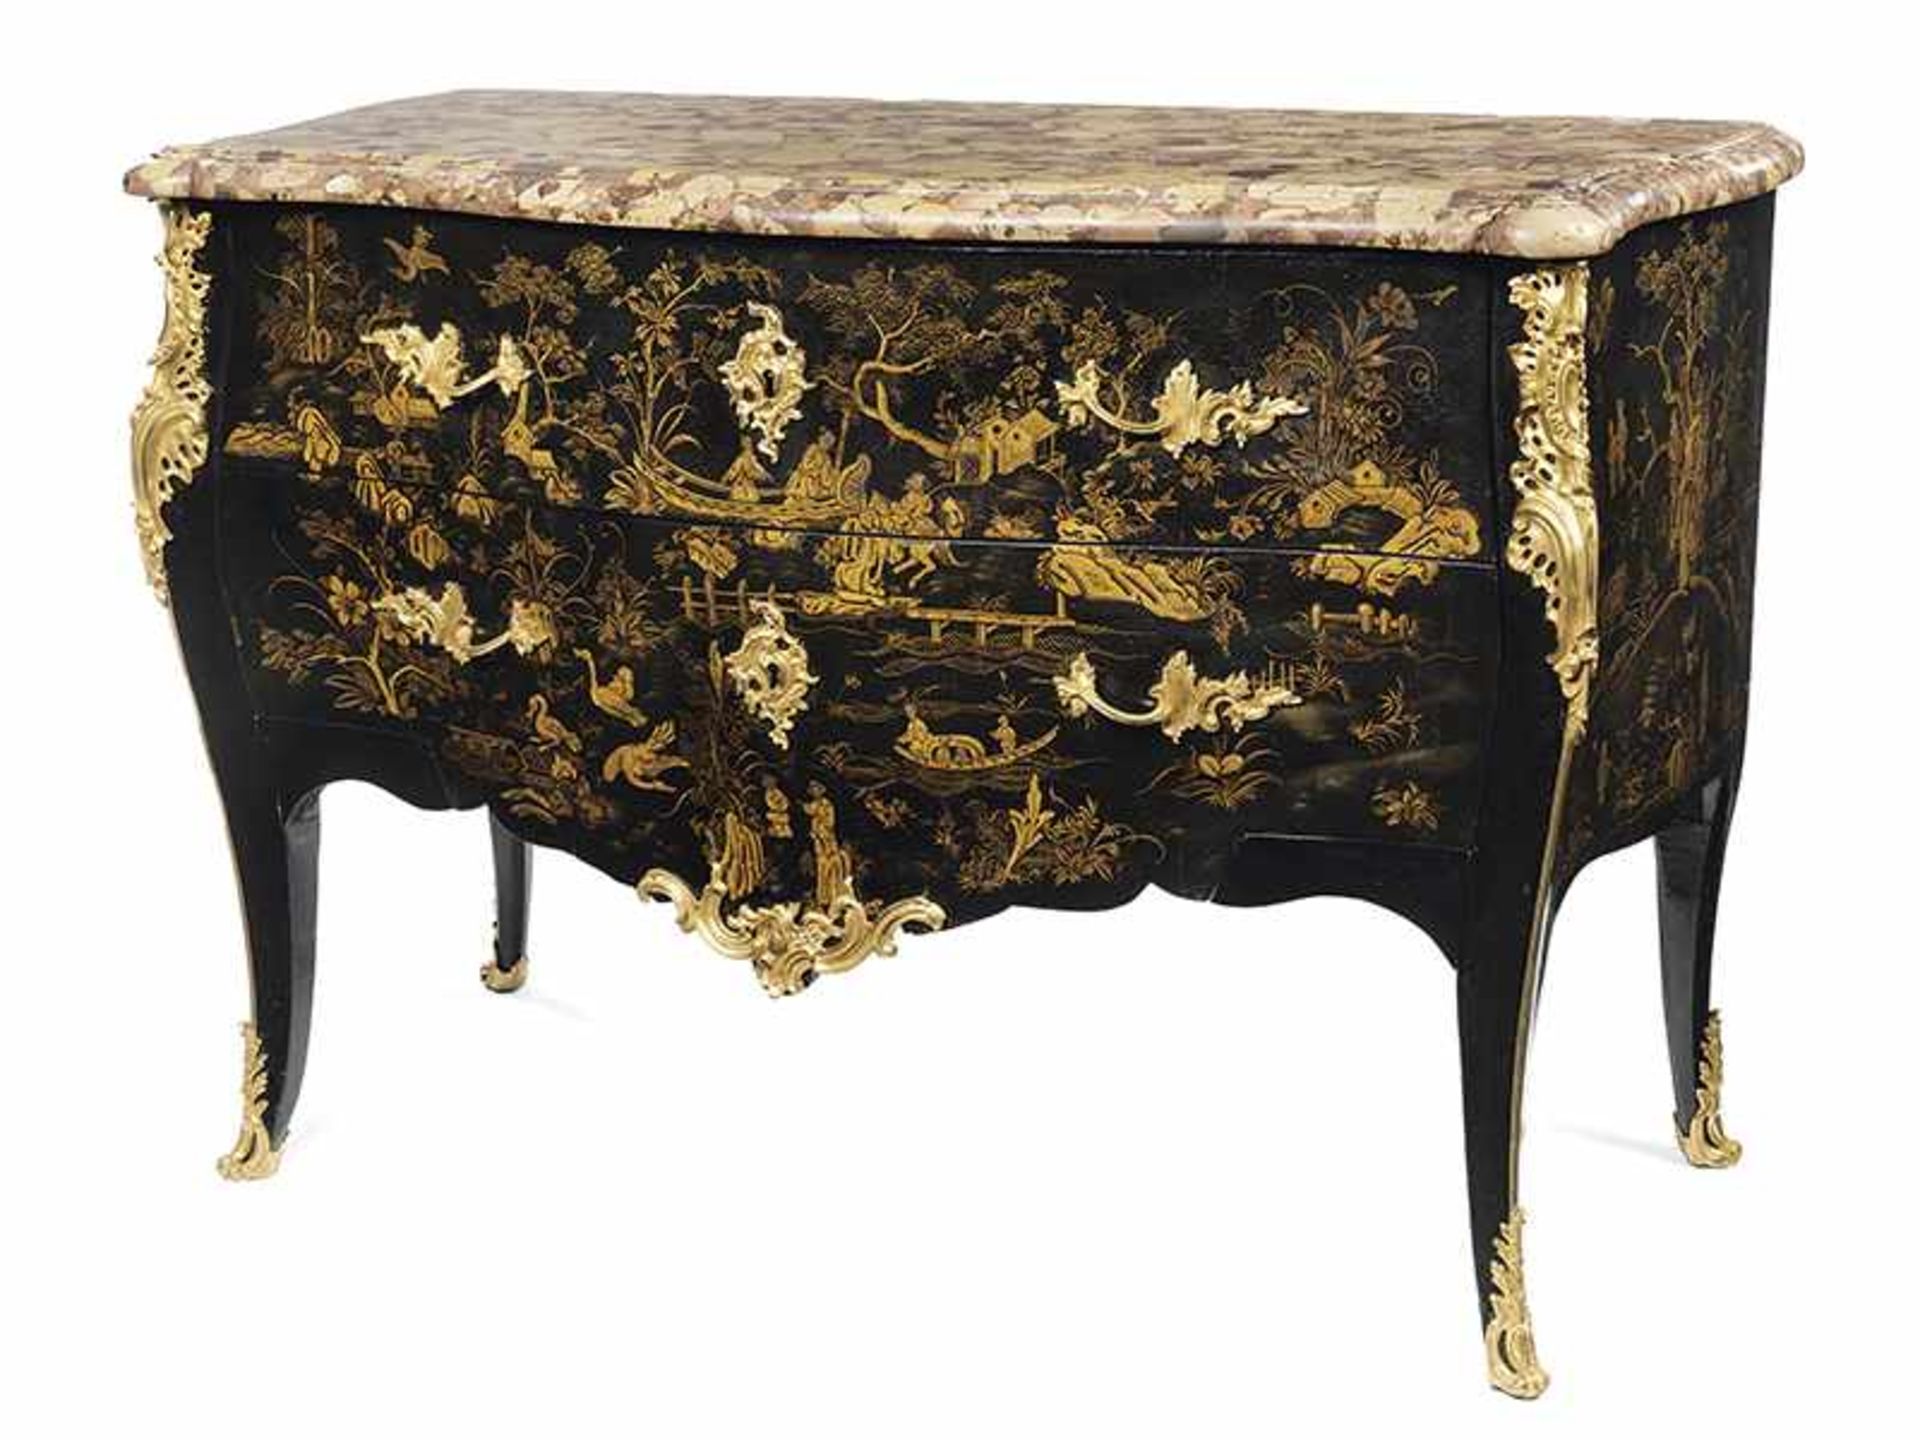 Elegant Louis XV black lacquer commode with gilt painting